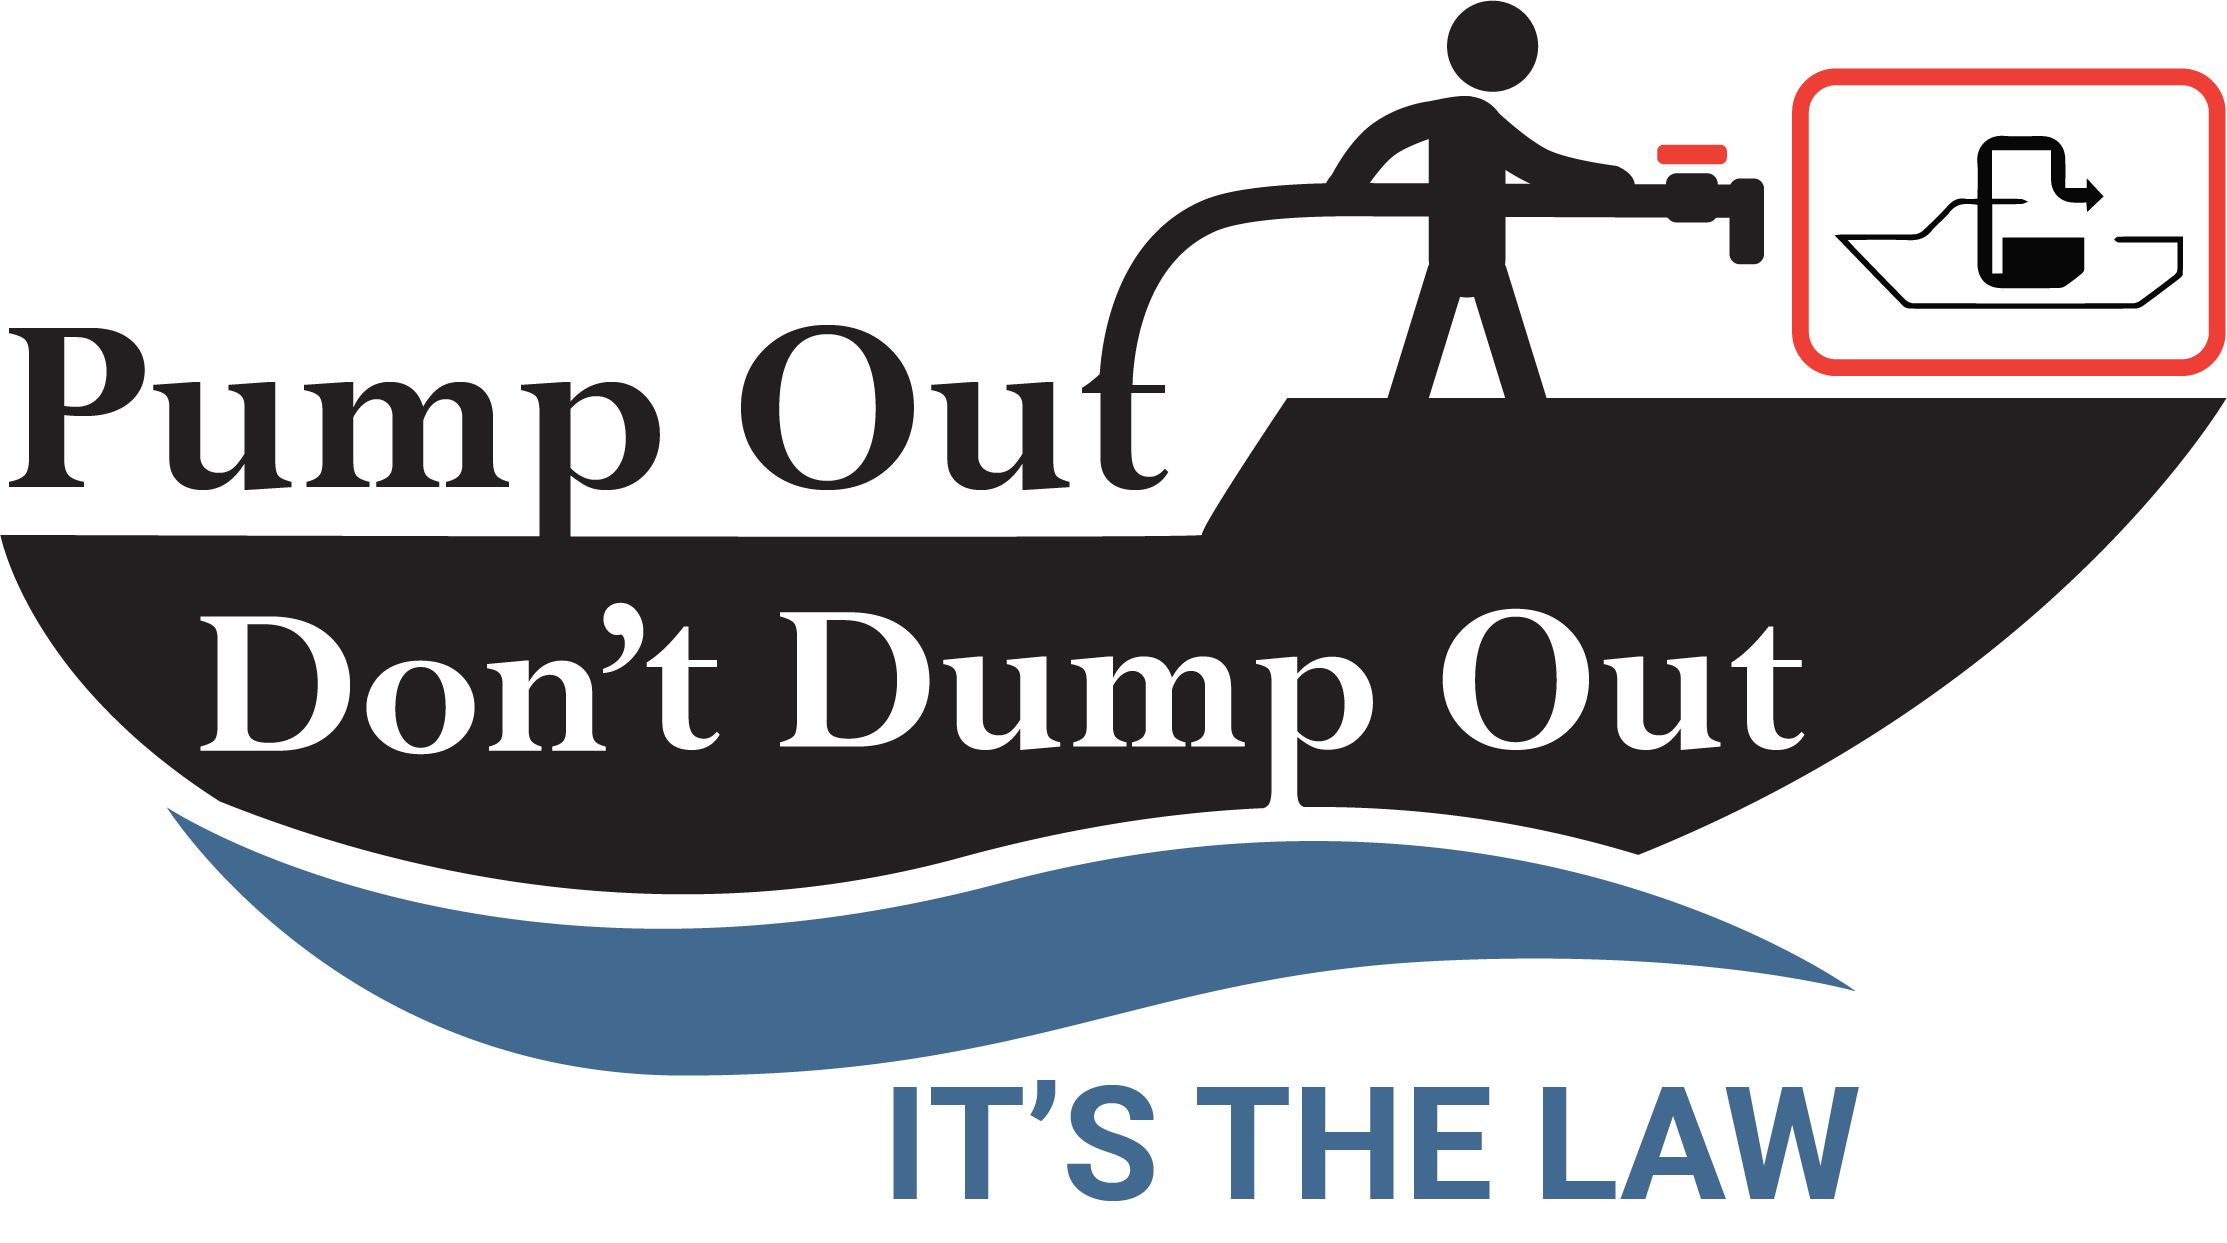 A graphic image of pump out don't dump out logo